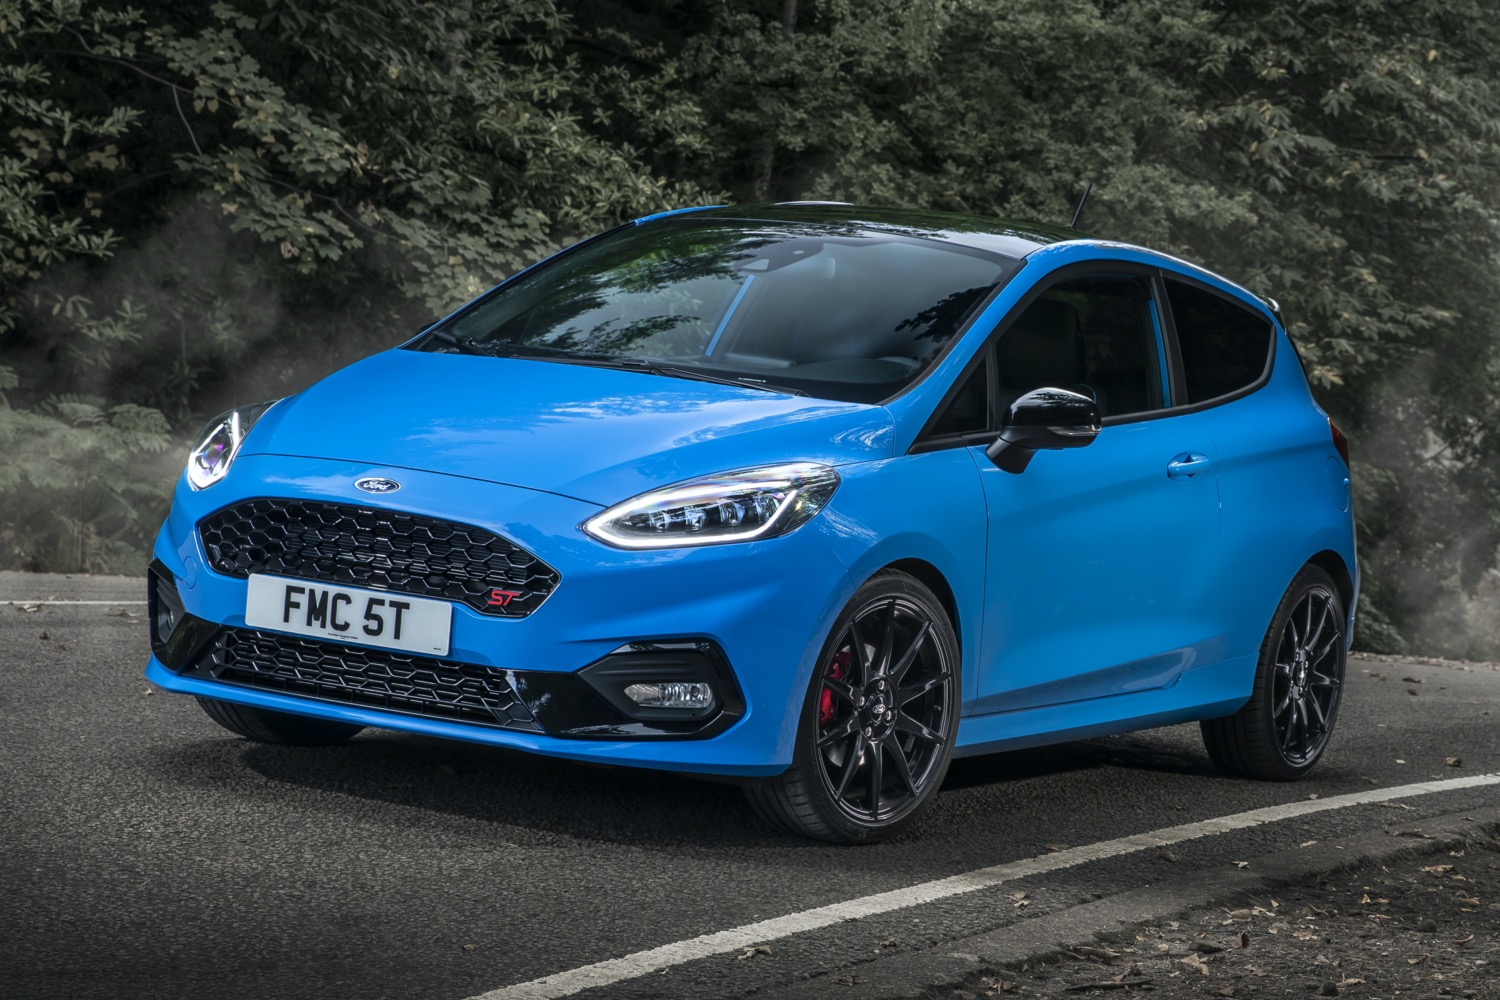 Ford Fiesta ST Edition Revealed In Europe, Limited To 500 Total Units